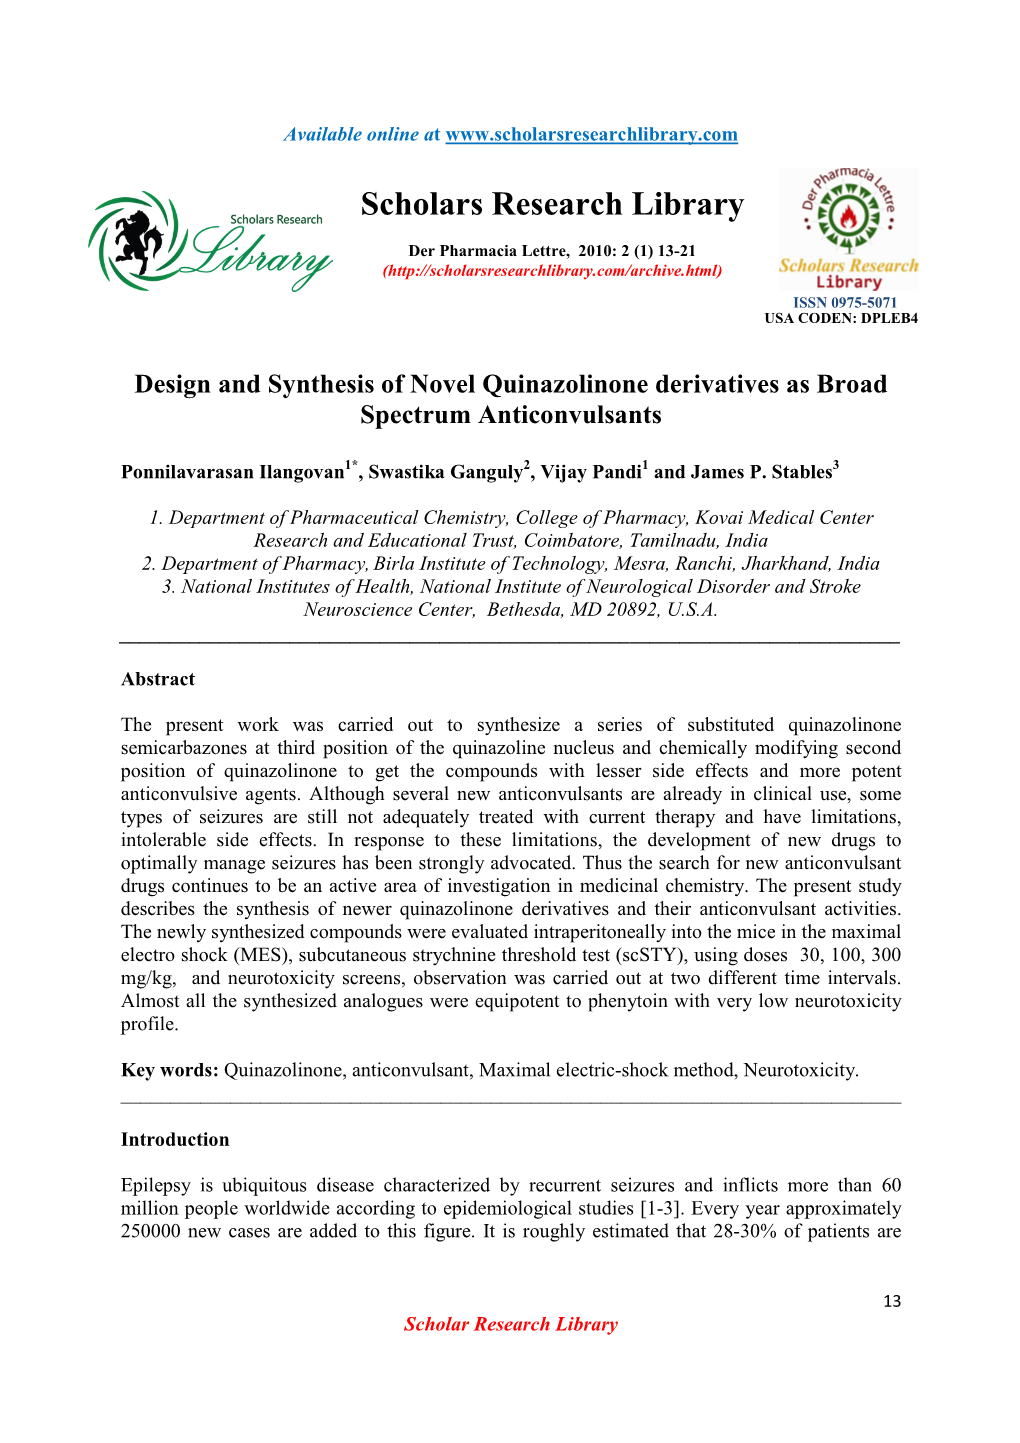 Design and Synthesis of Novel Quinazolinone Derivatives As Broad Spectrum Anticonvulsants